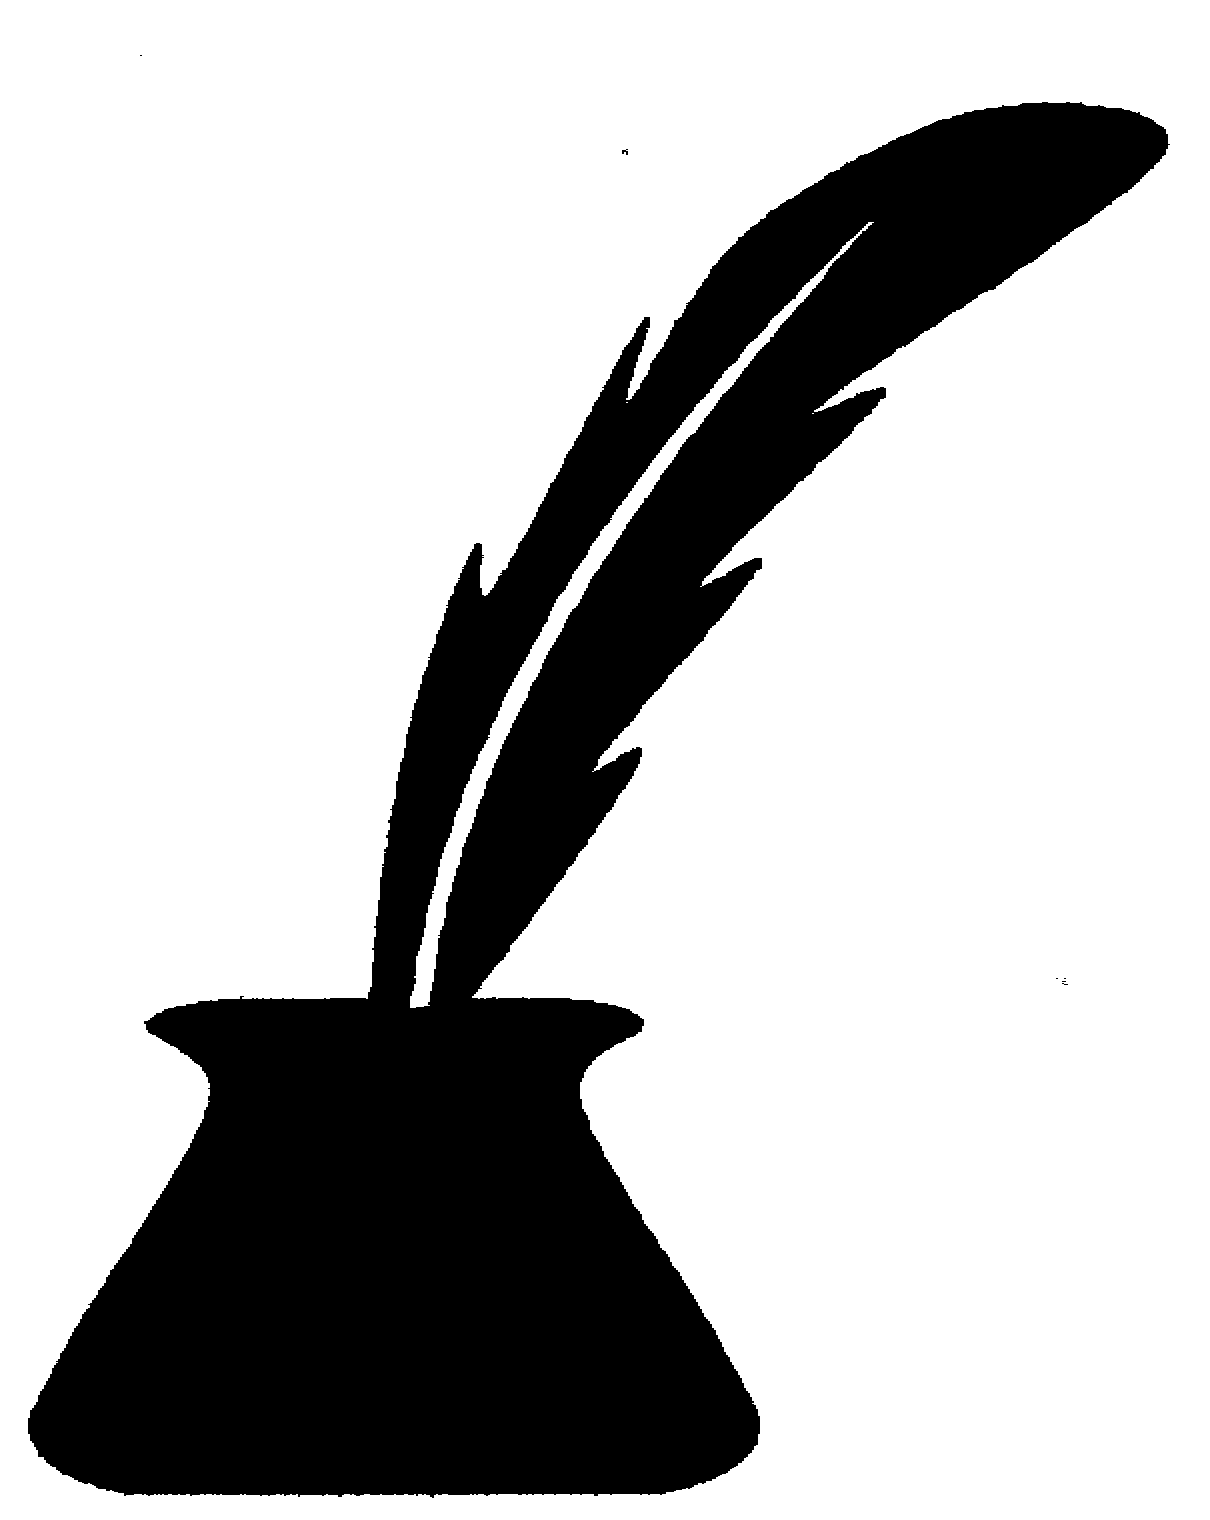 Feather pen clipart free clipart images image 2